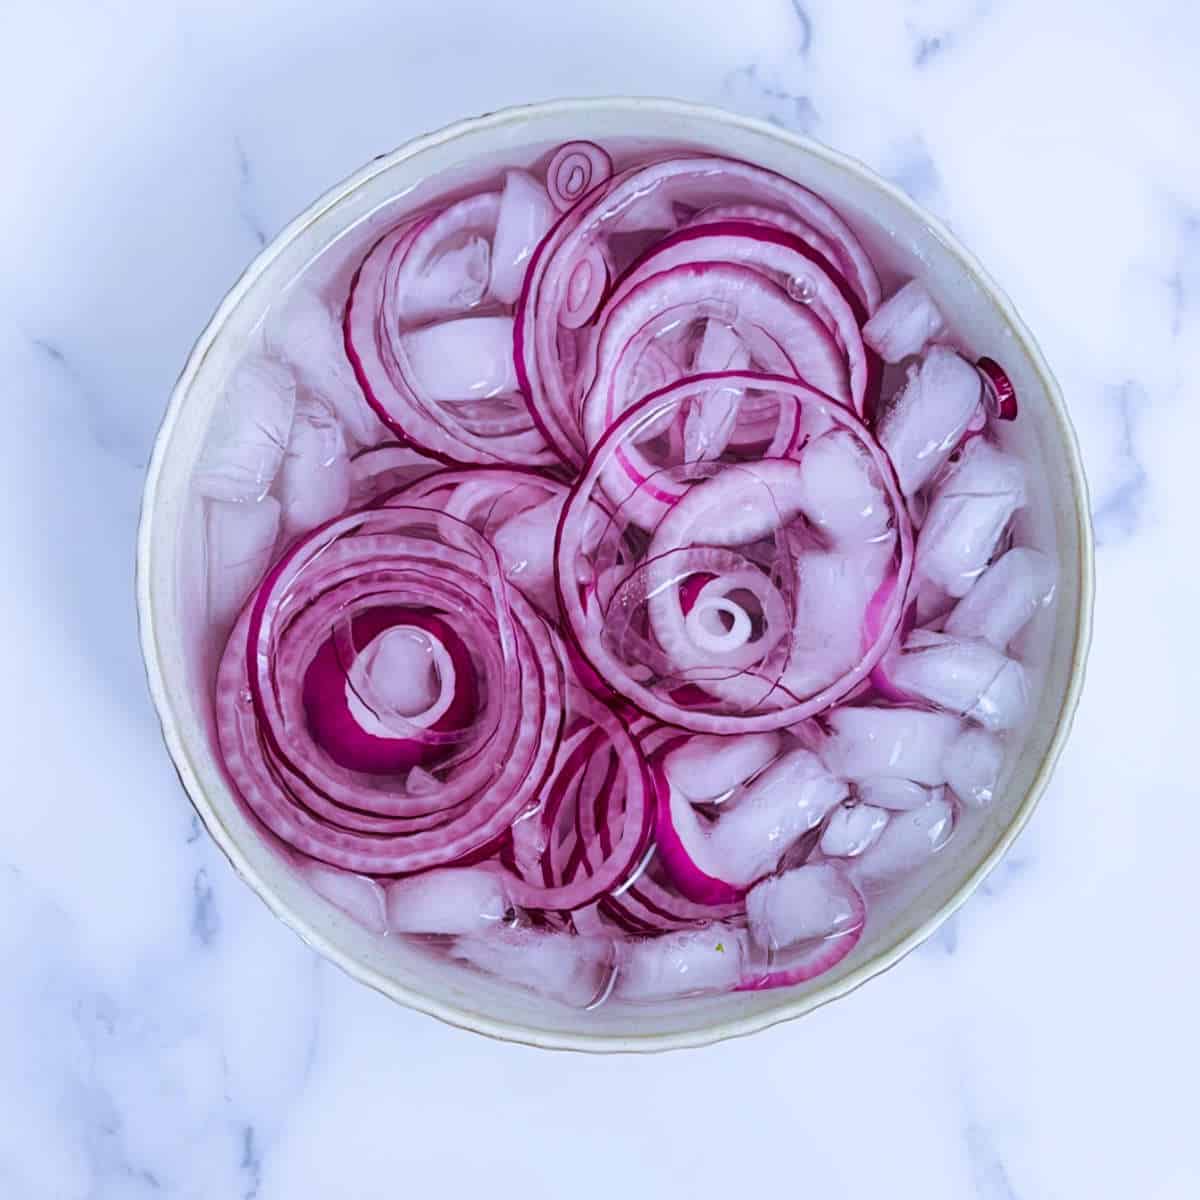 Step showing soaking of the cut onion in ice water.